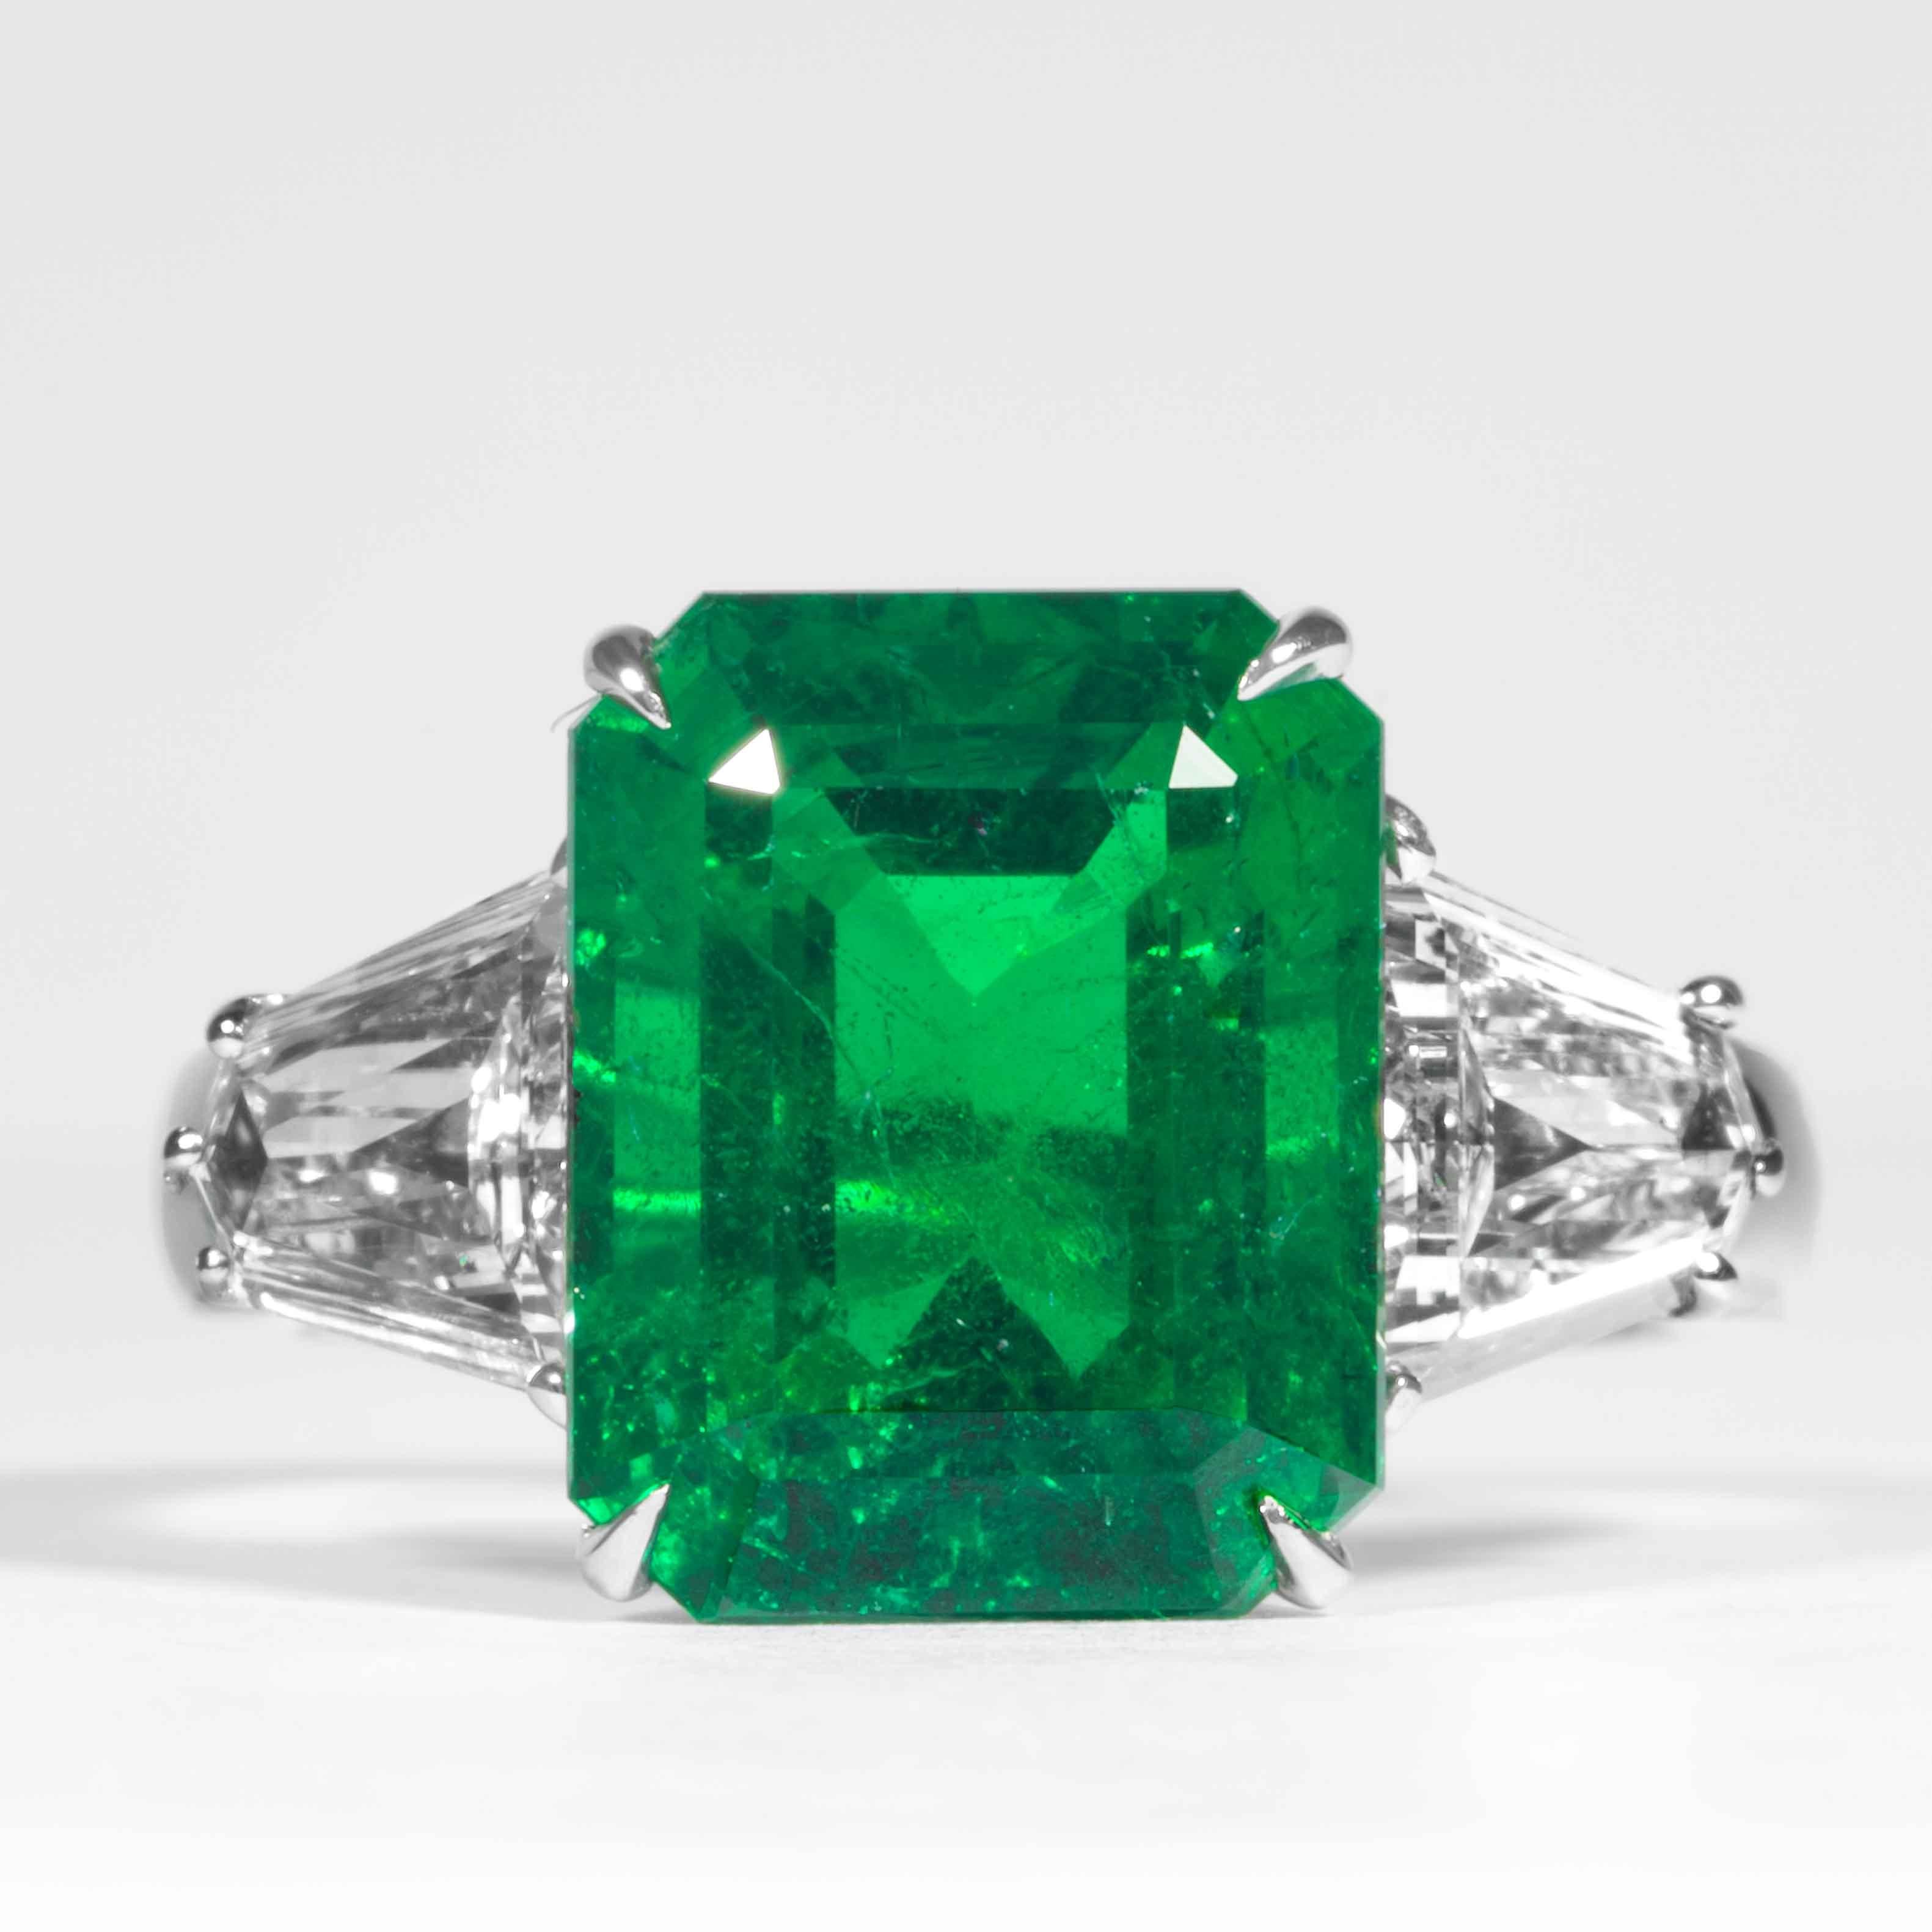 This emerald ring is offered by Shreve, Crump & Low. This green emerald cut emerald is custom set in a handcrafted Shreve, Crump & Low 3-stone platinum ring. This captivating green emerald measures 12.62 x 9.75 x 7.08mm and weighs 6.08 carats.  This